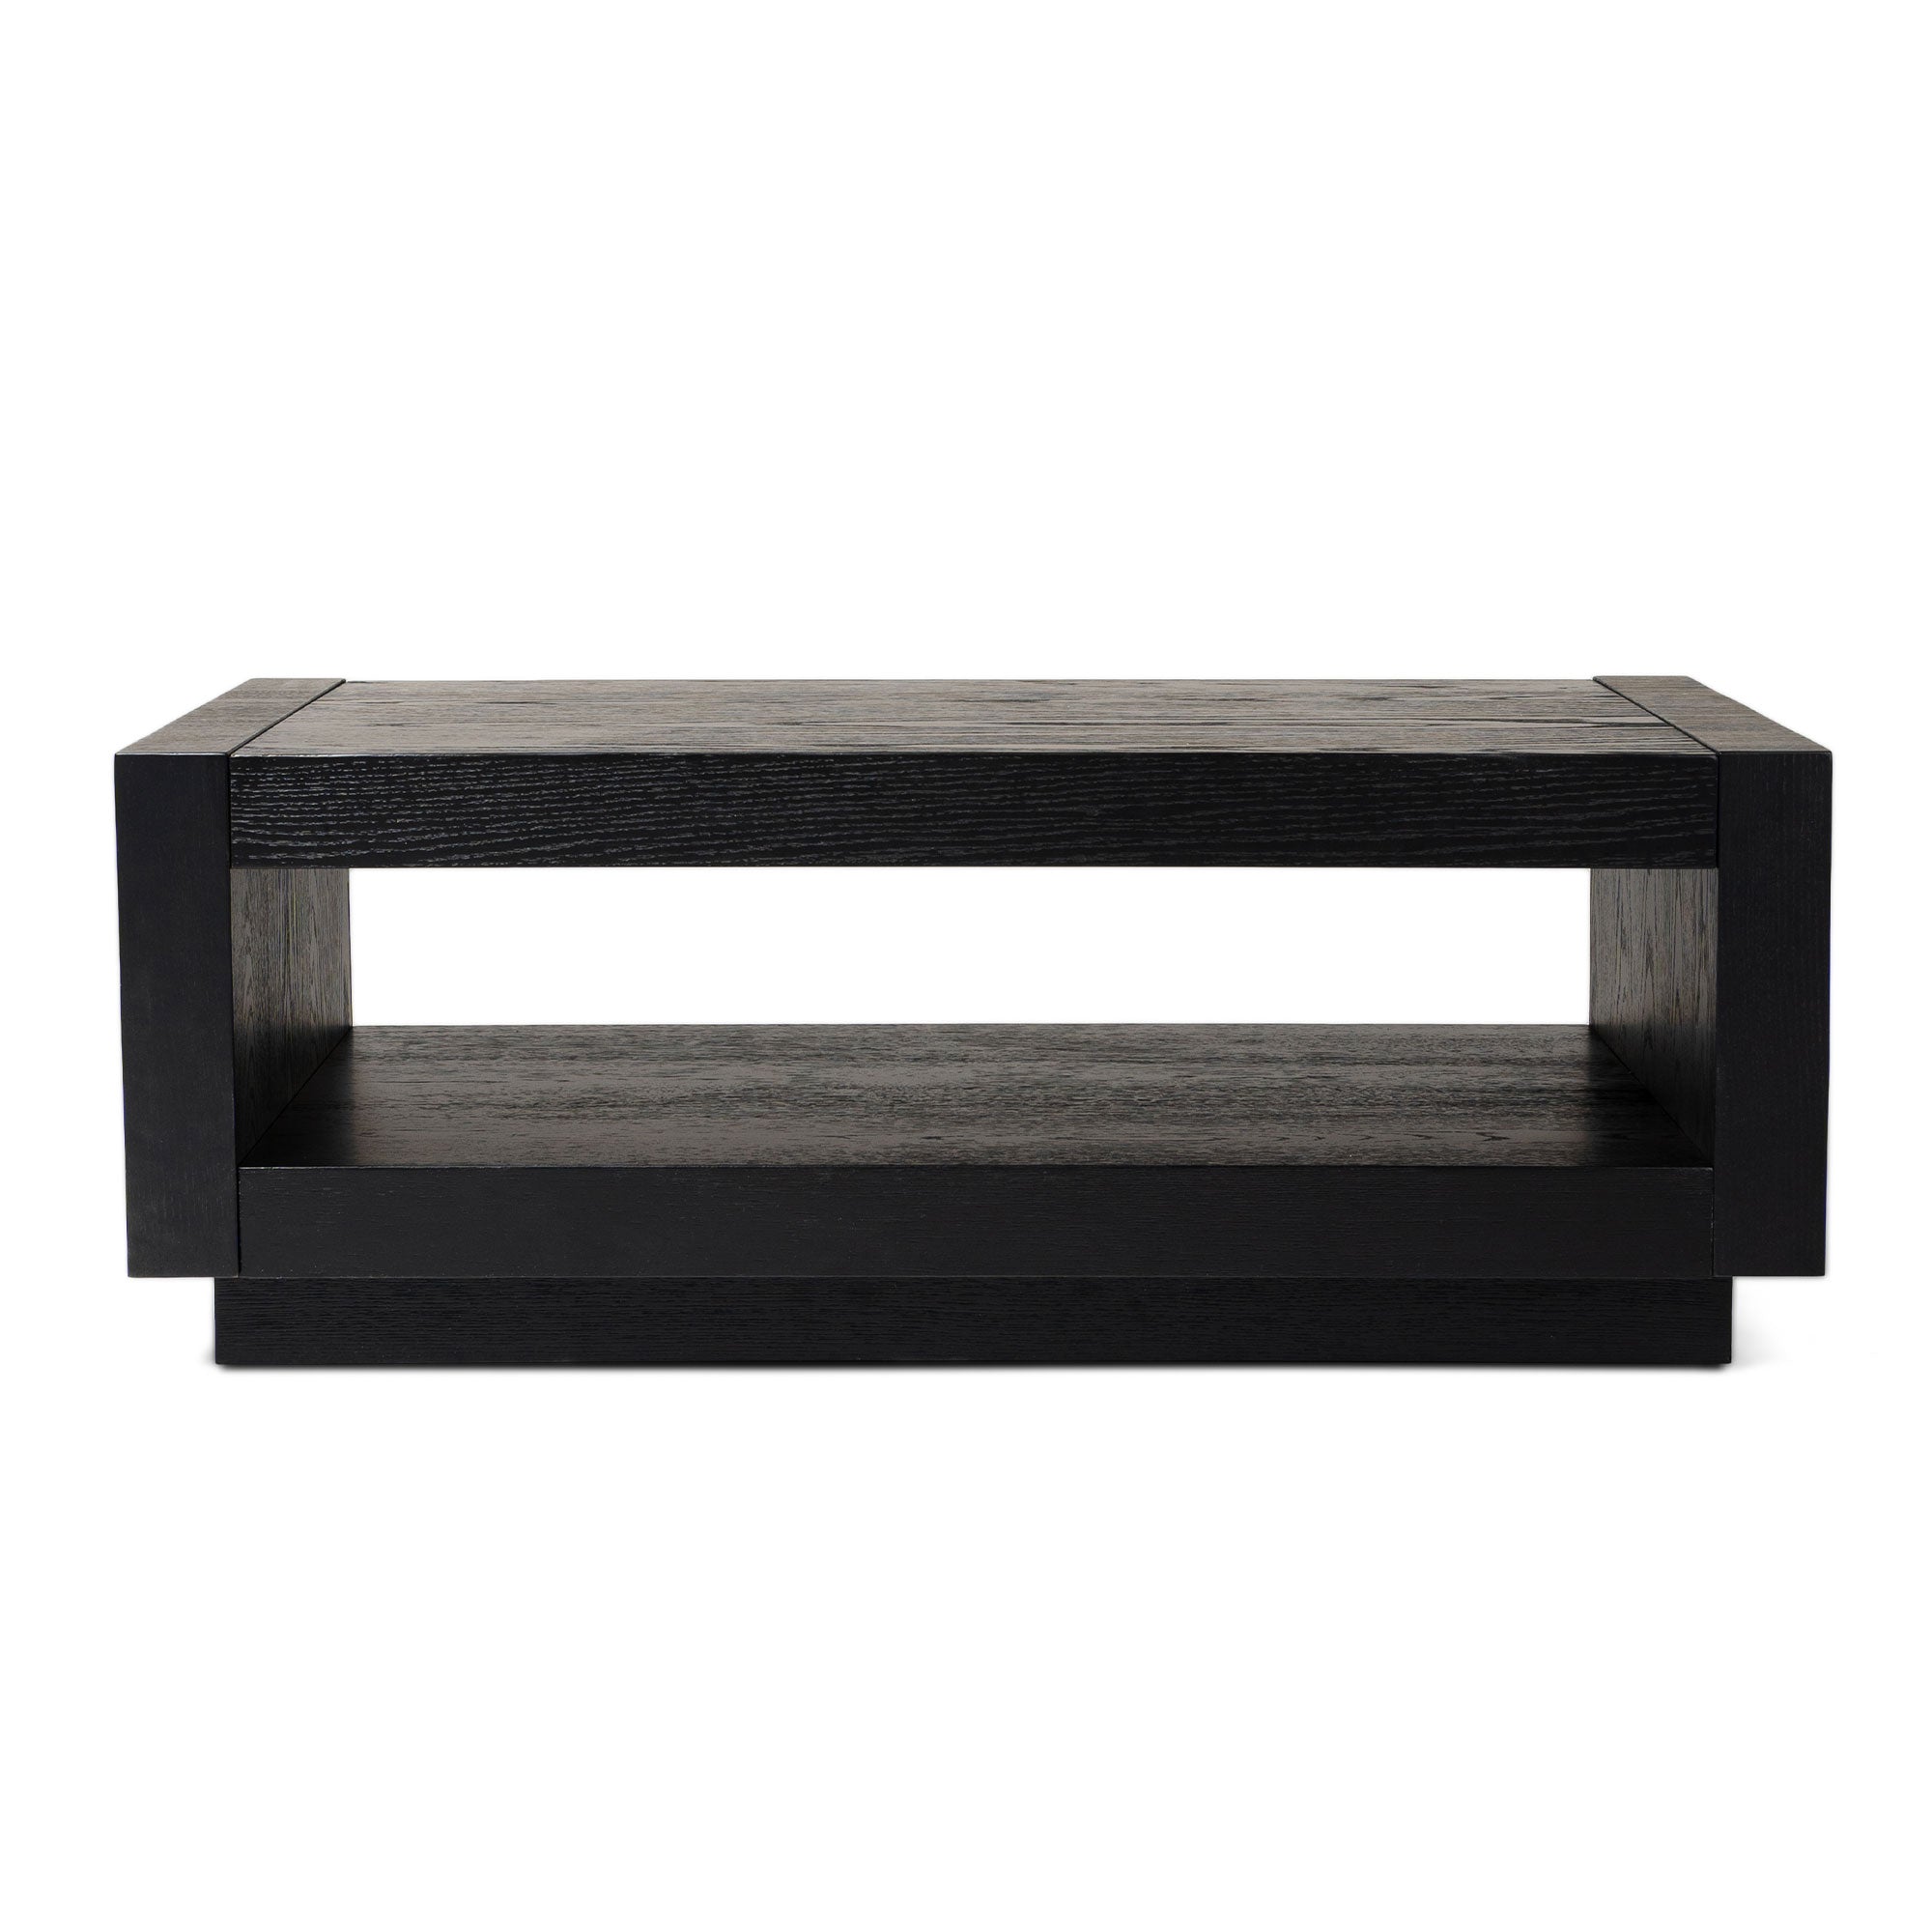 Artemis Contemporary Wooden Coffee Table in Refined Black Finish